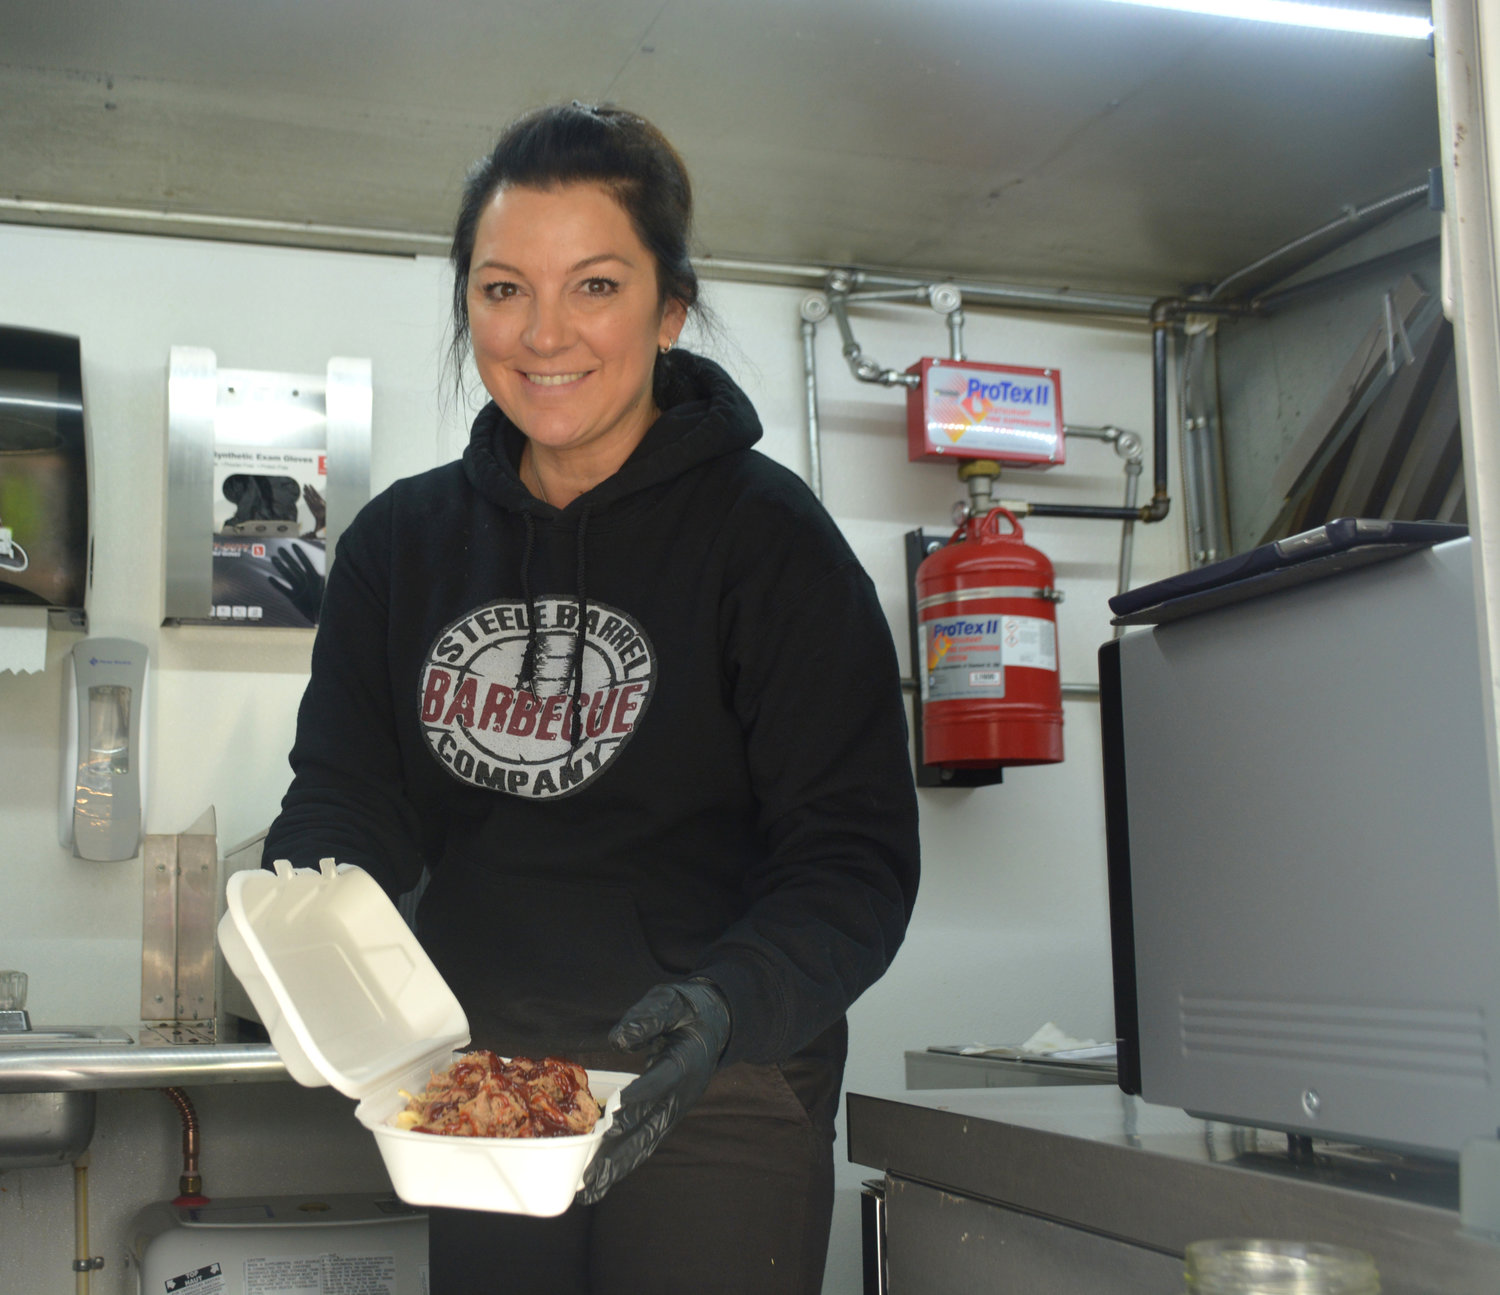 Ksea Clayton shows off a serving of the loaded mac and cheese at the Steele Barrel Barbecue truck in Yelm.